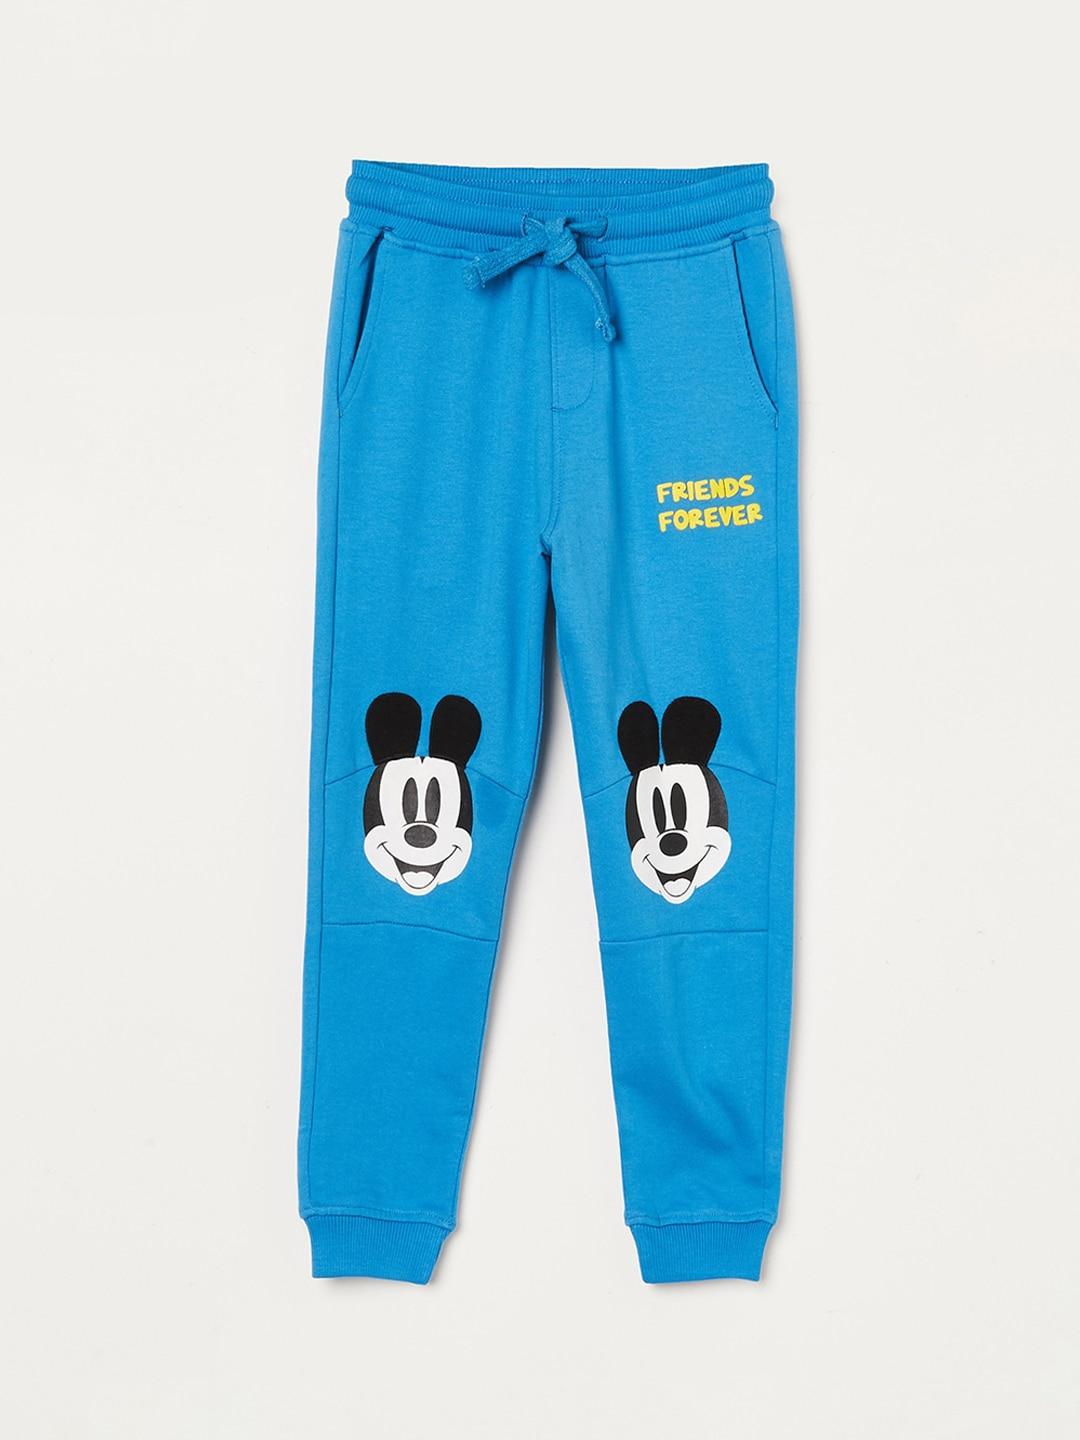 Juniors by Lifestyle Boys MICKEY & FRIENDS Printed Track Pants